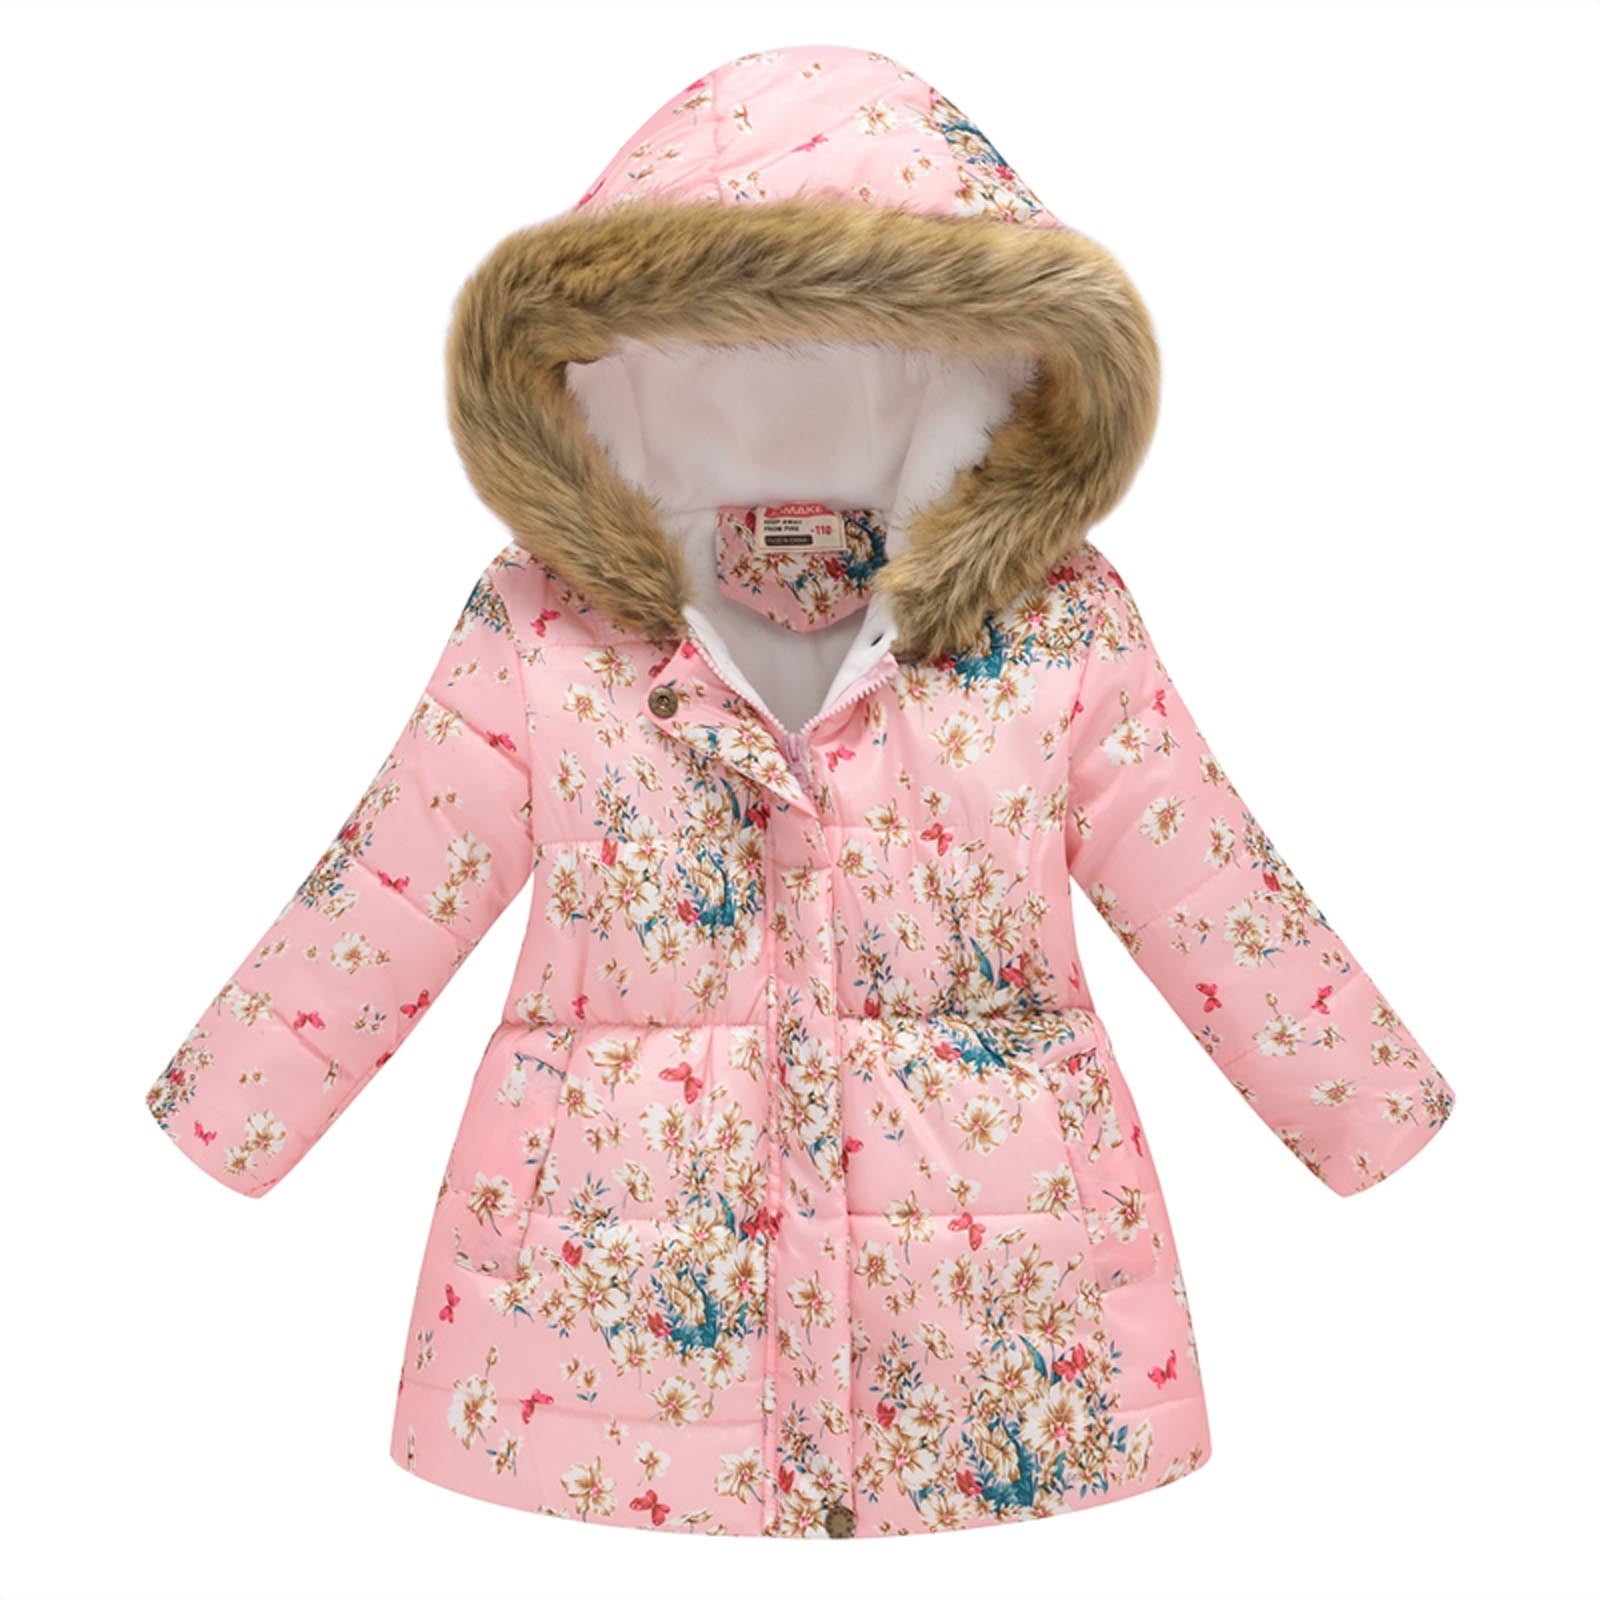 Baby Girls Winter Chunky Coat Hooded Jacket Warm Padded Floral Overcoat Outwear 